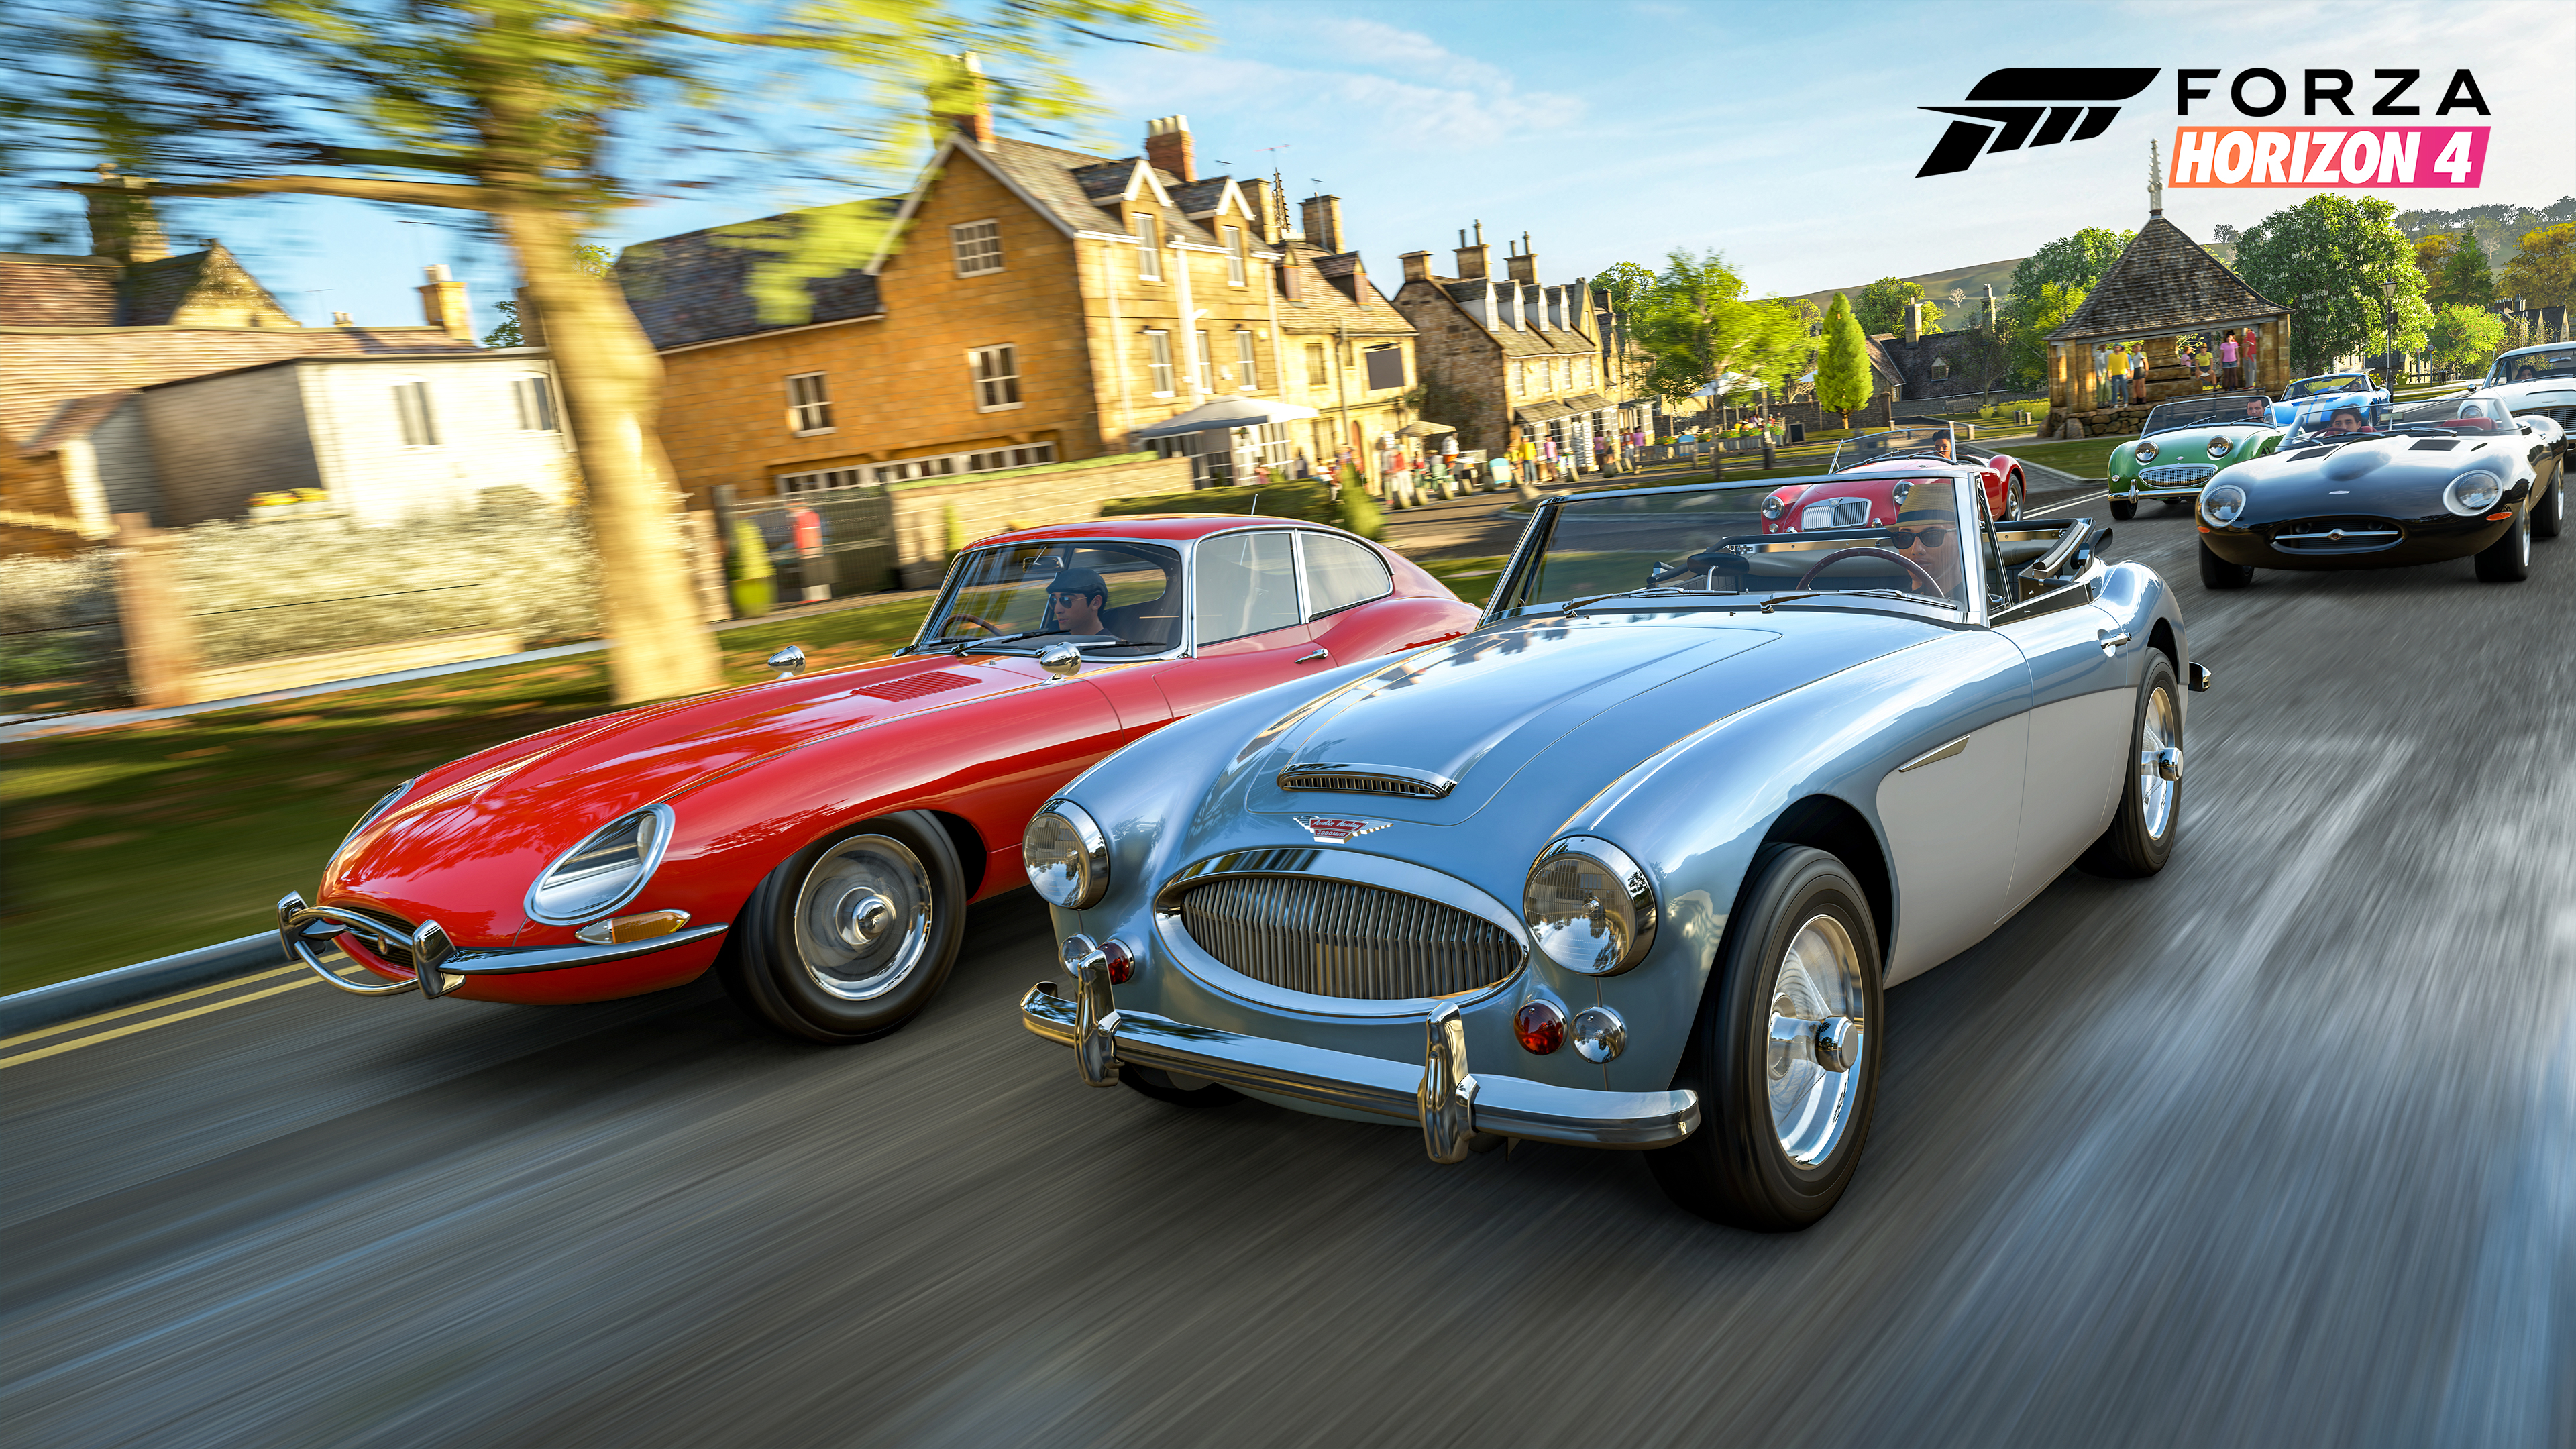 Forza Horizon 4 is coming year – and it will set Britain